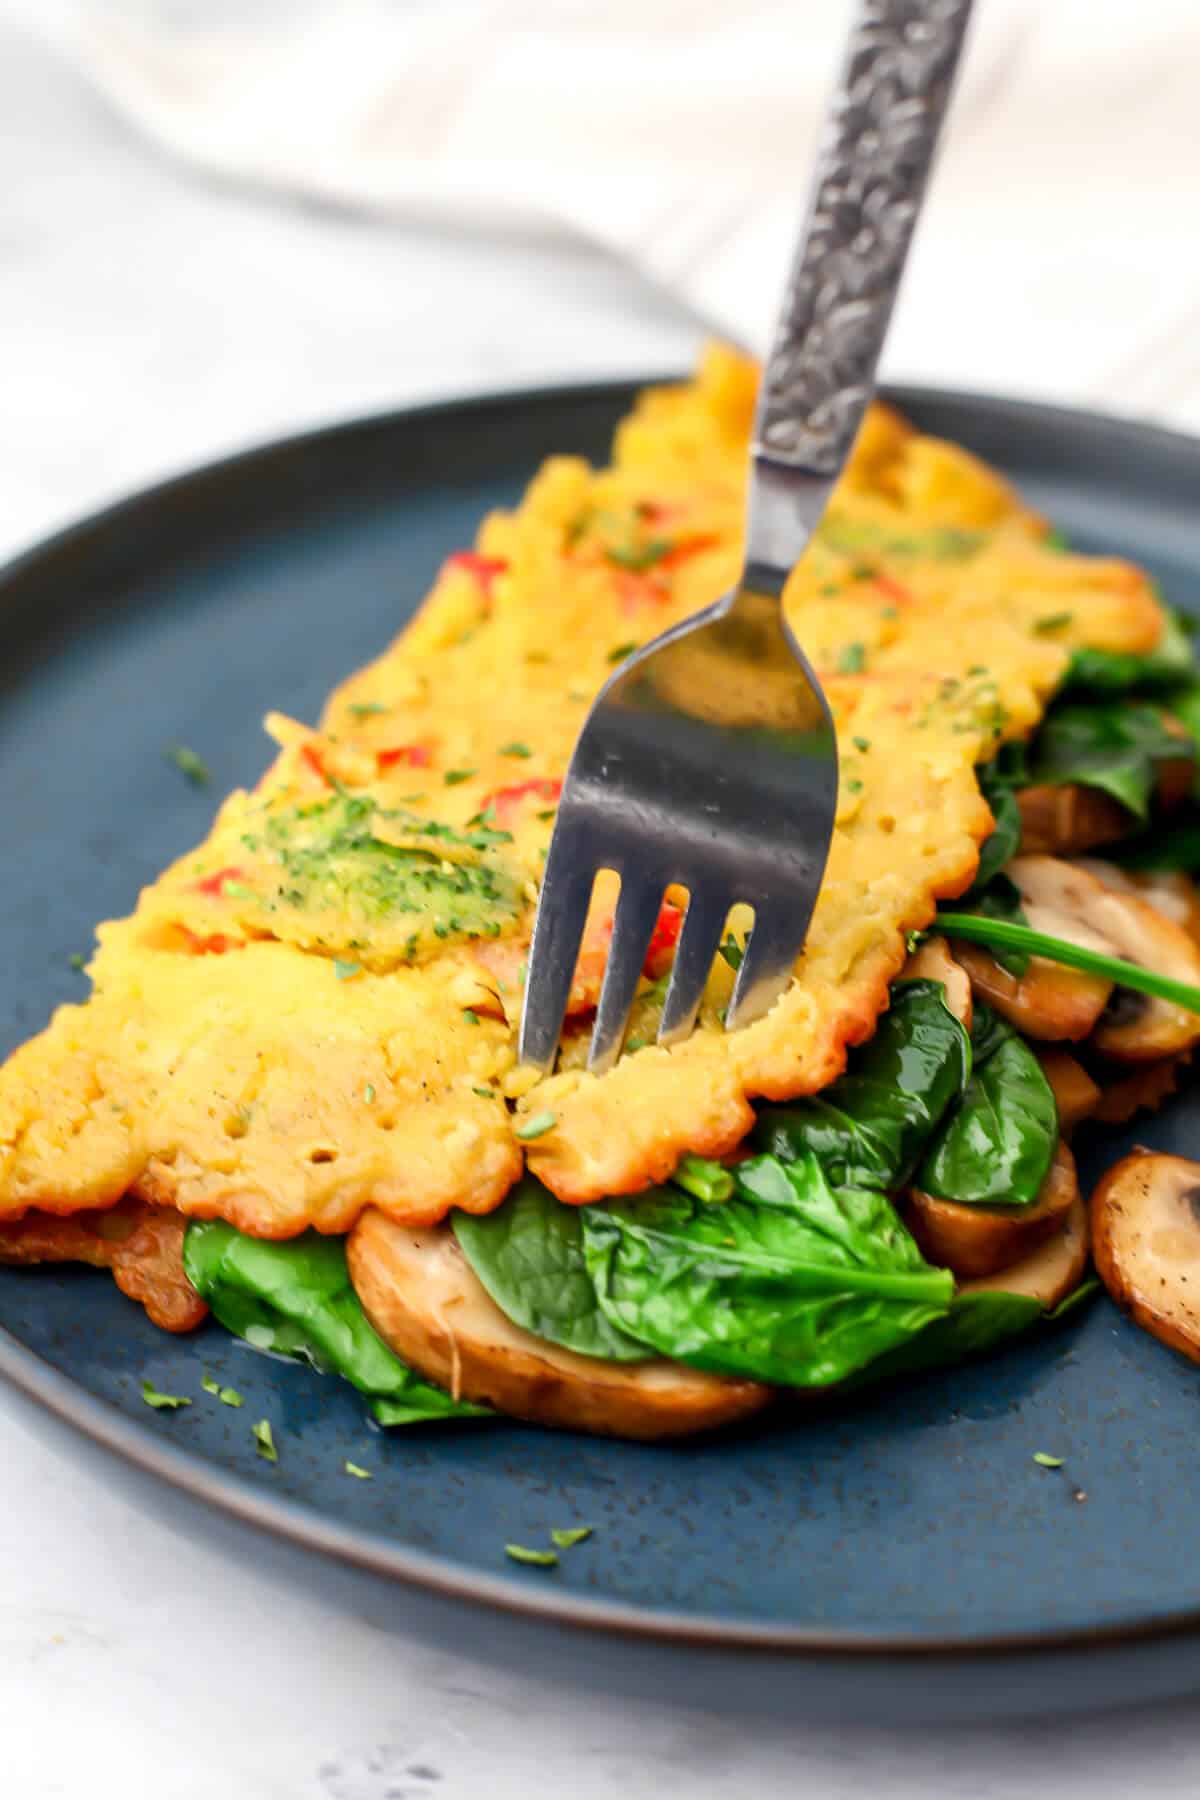 A vegan omelet on a blue plate with a fork sticking in it.